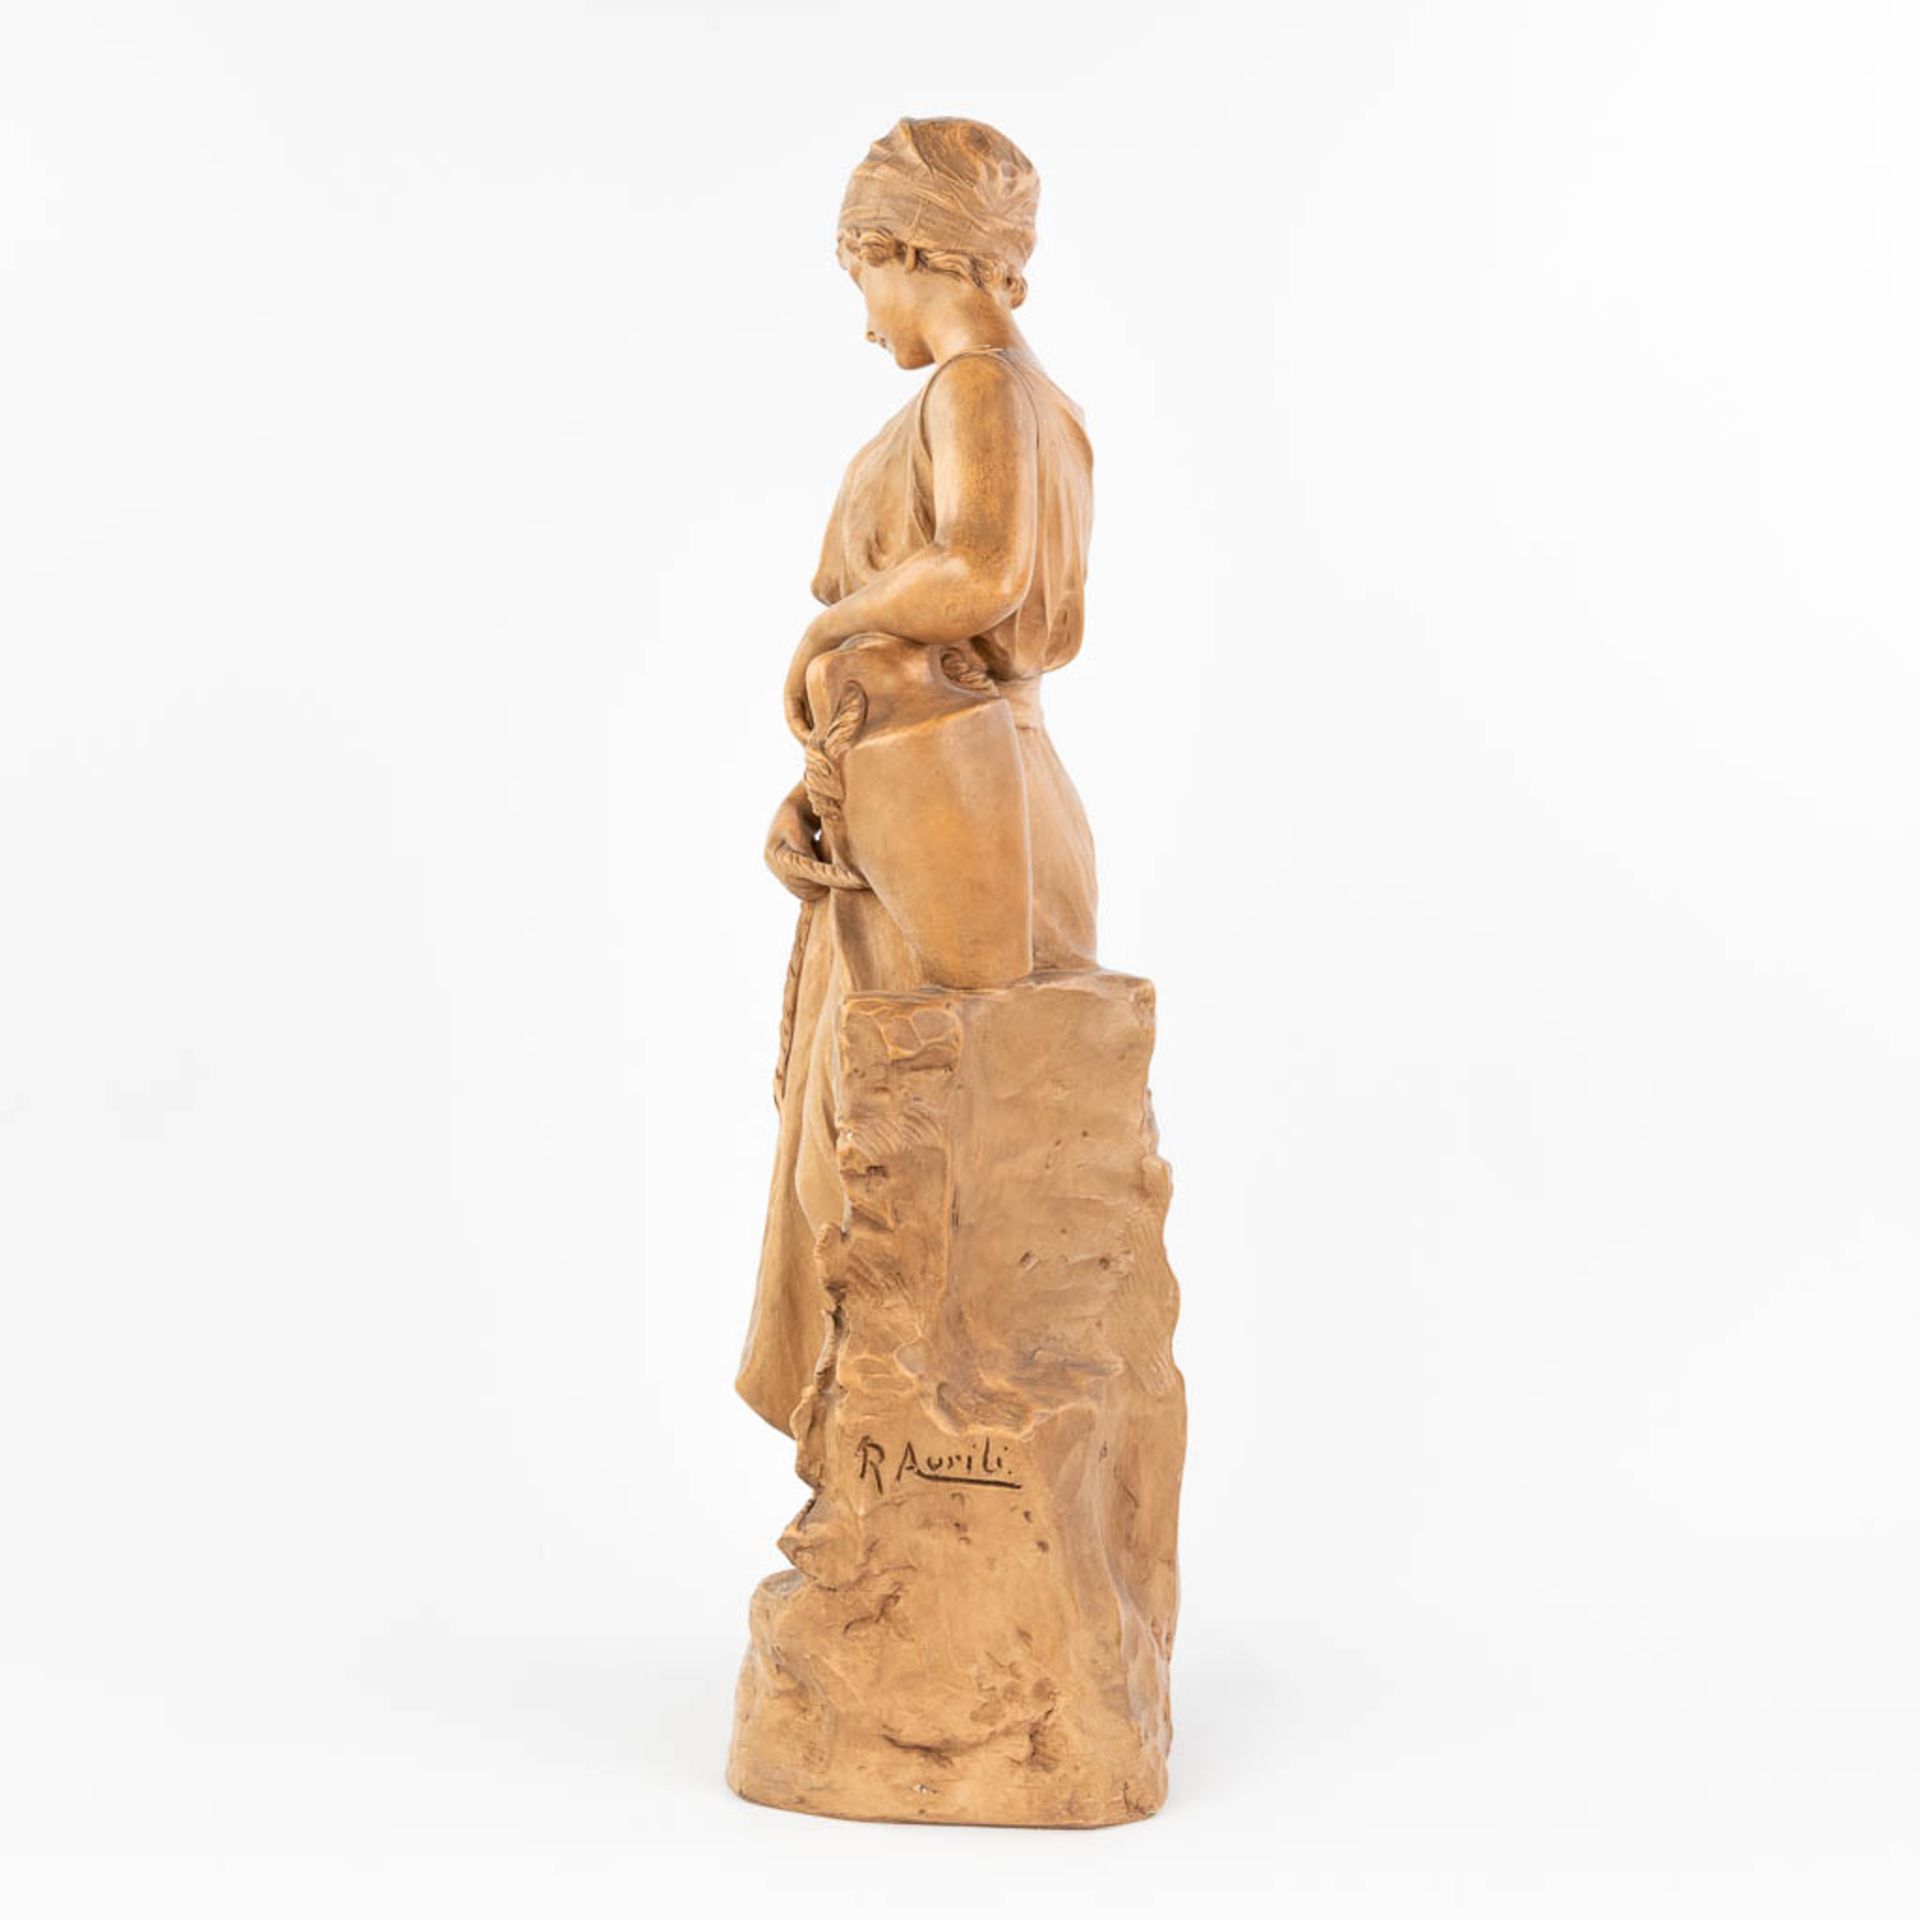 Richard AURILI (1834-c.1914) 'The Water carrier,' a figurine made of terracotta. (H:75,5 cm) - Image 2 of 12